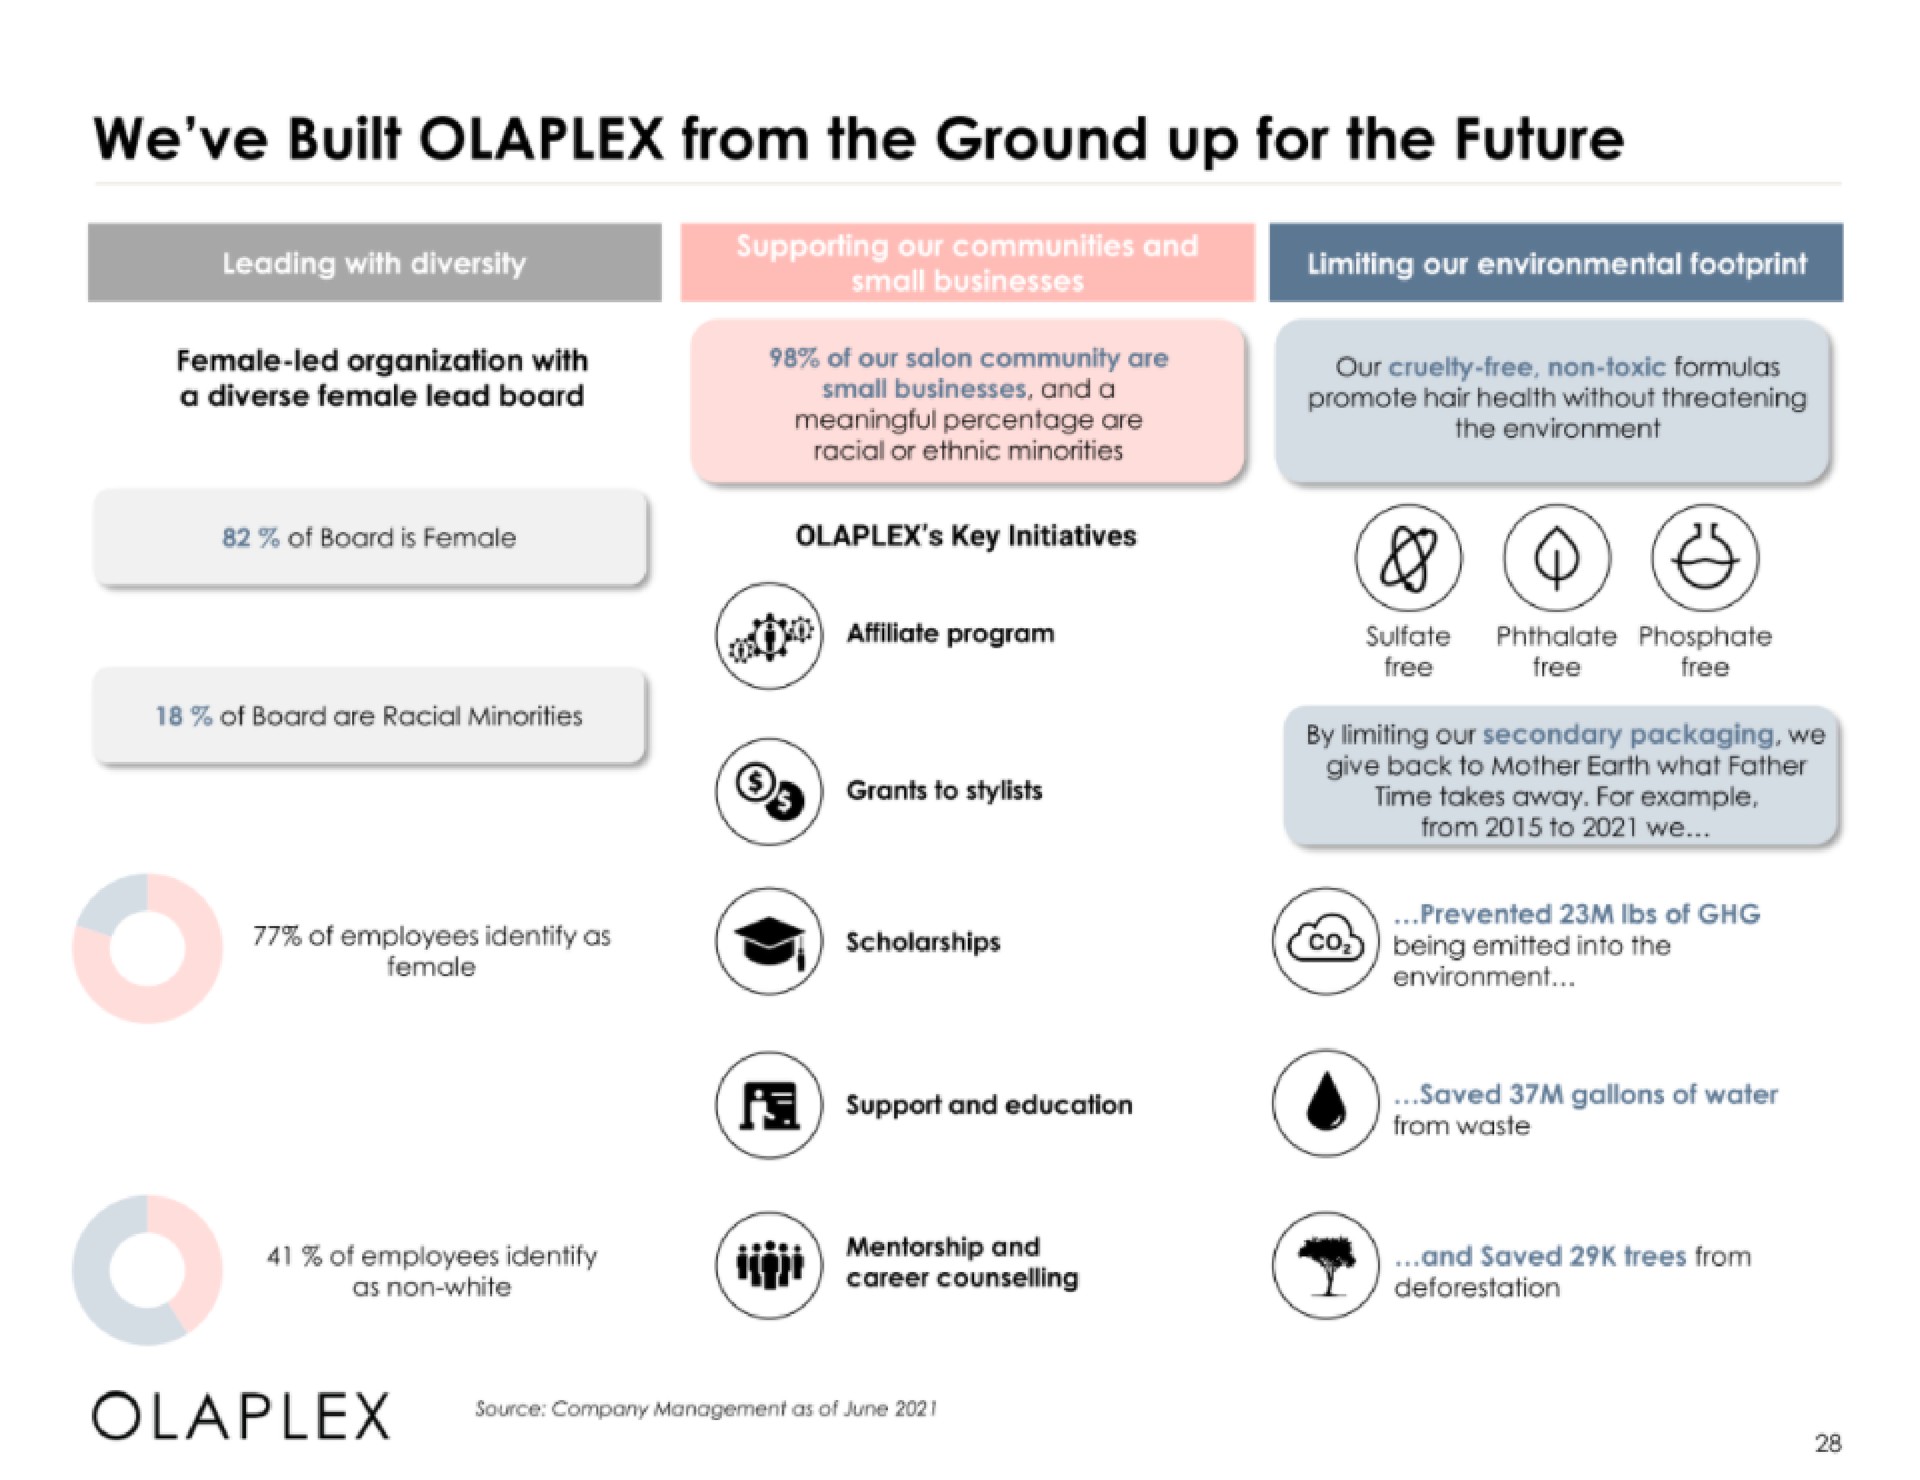 we built from the ground up for the future | Olaplex